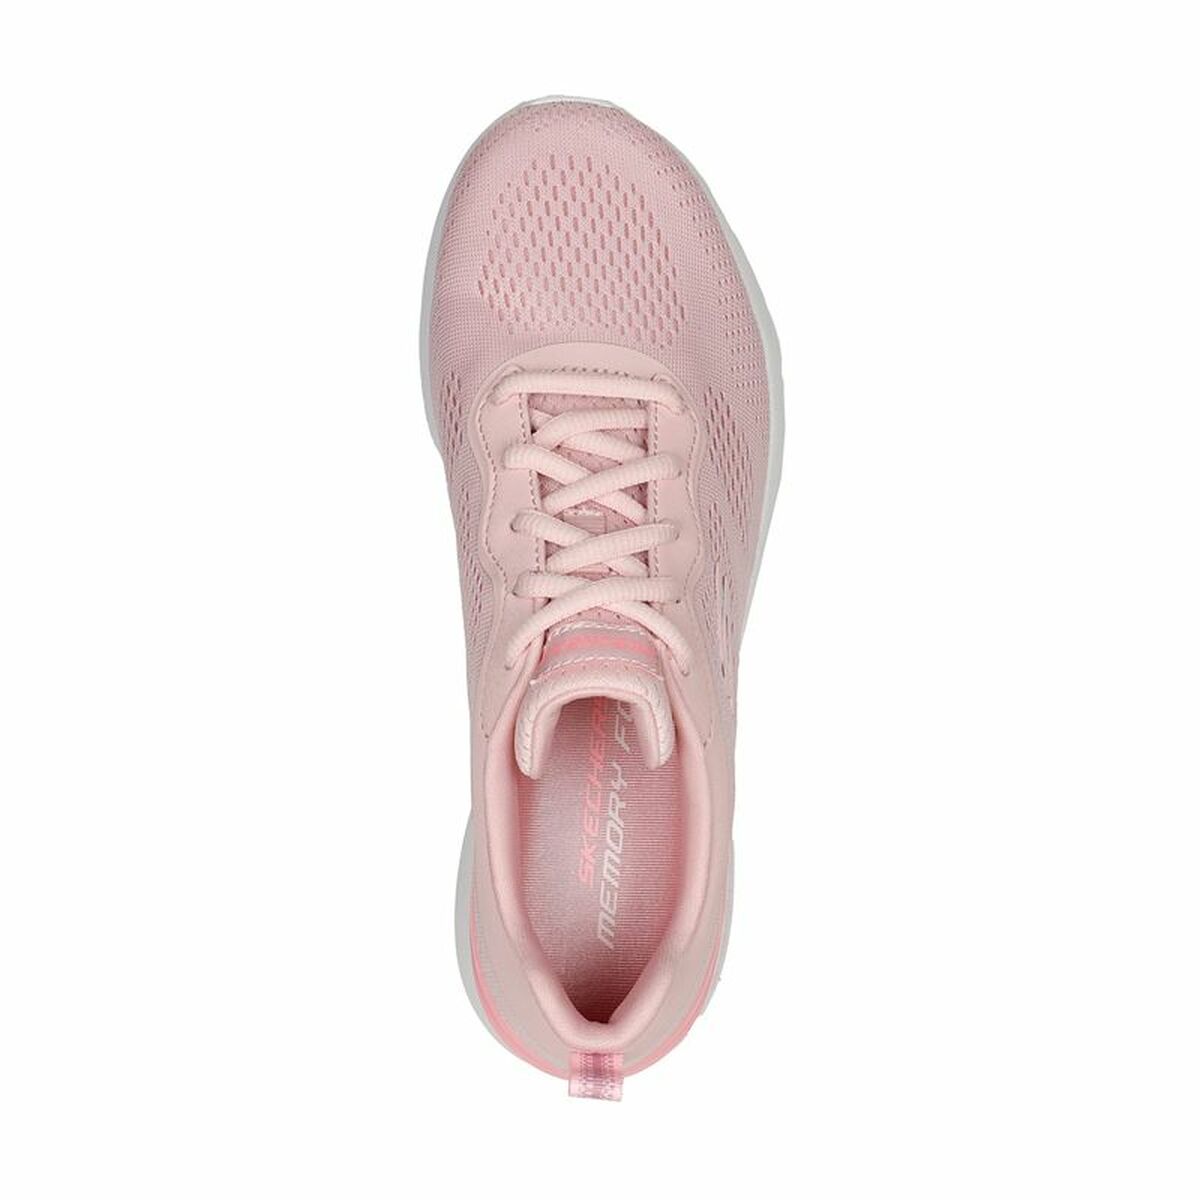 Sports Trainers for Women Skechers Skech-Air Dynamight - New Grind Light Pink